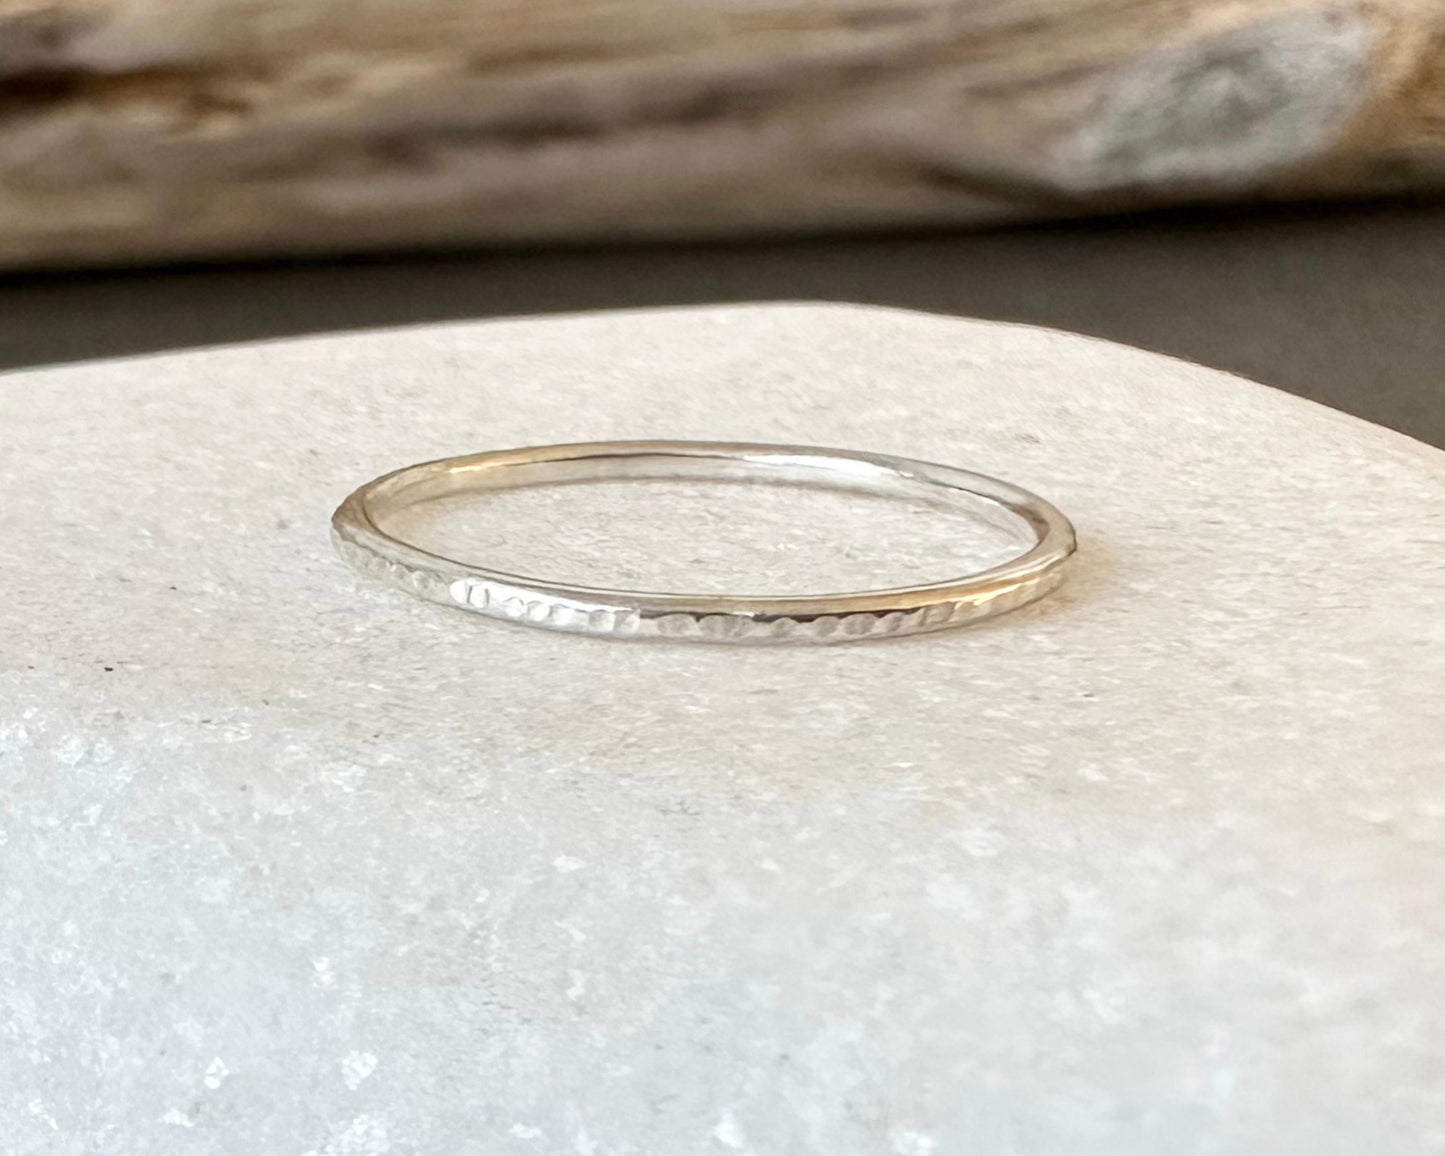 925 Sterling Silver Ring, 1.2mm, 1.5mm, 1.8mm, Ripple Hammered Effect Minimalist Ring Band, Handmade Stacking Ring, Skinny Thumb Ring